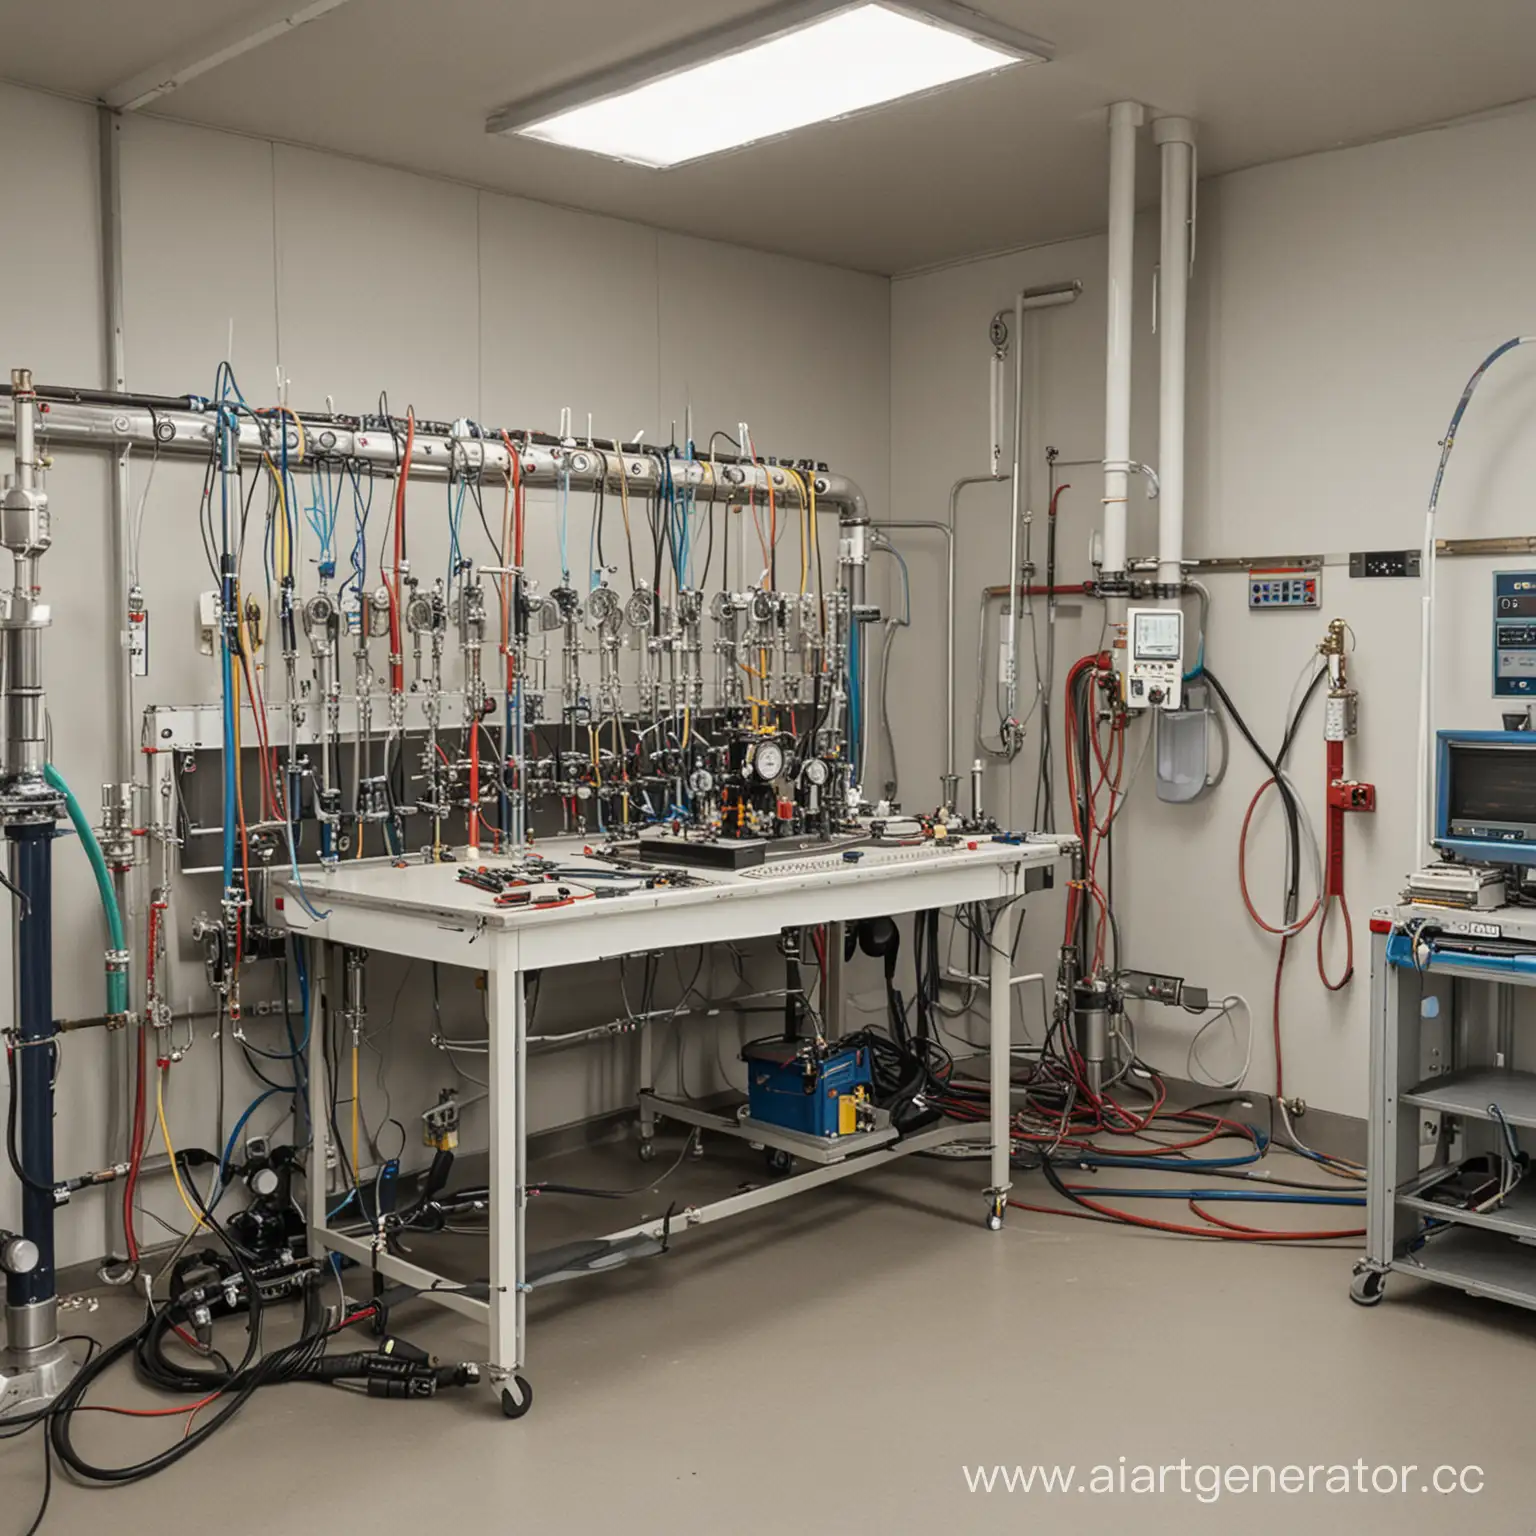 A technical laboratory with a test bench. Several hoses are connected to it, they are under high pressure. There are measuring devices and barometers next to the hoses. An examiner in a helmet is monitoring the process.